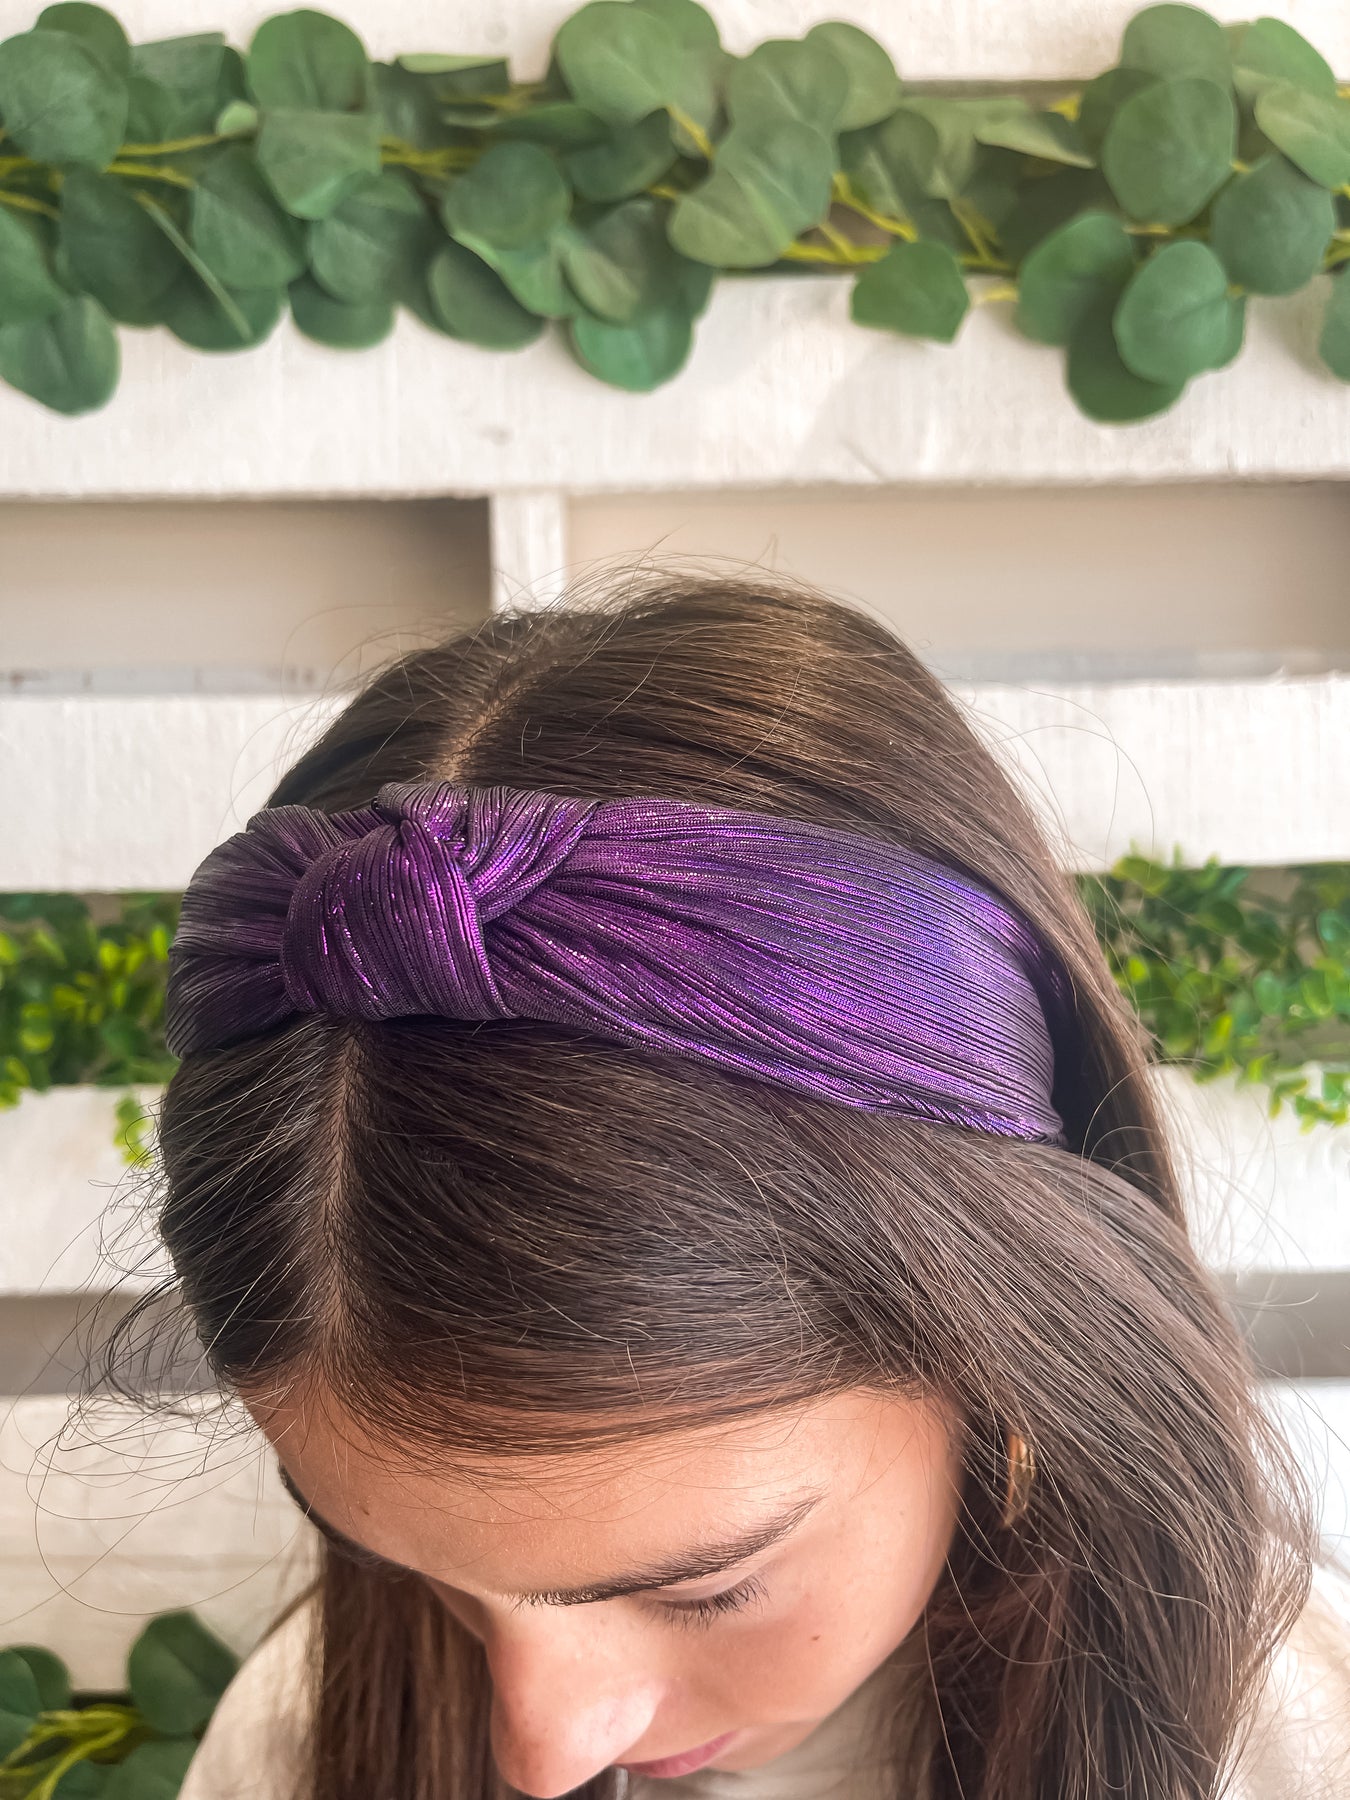 Brianna Cannon headbands are a sight to see!!🤩 Spice up any